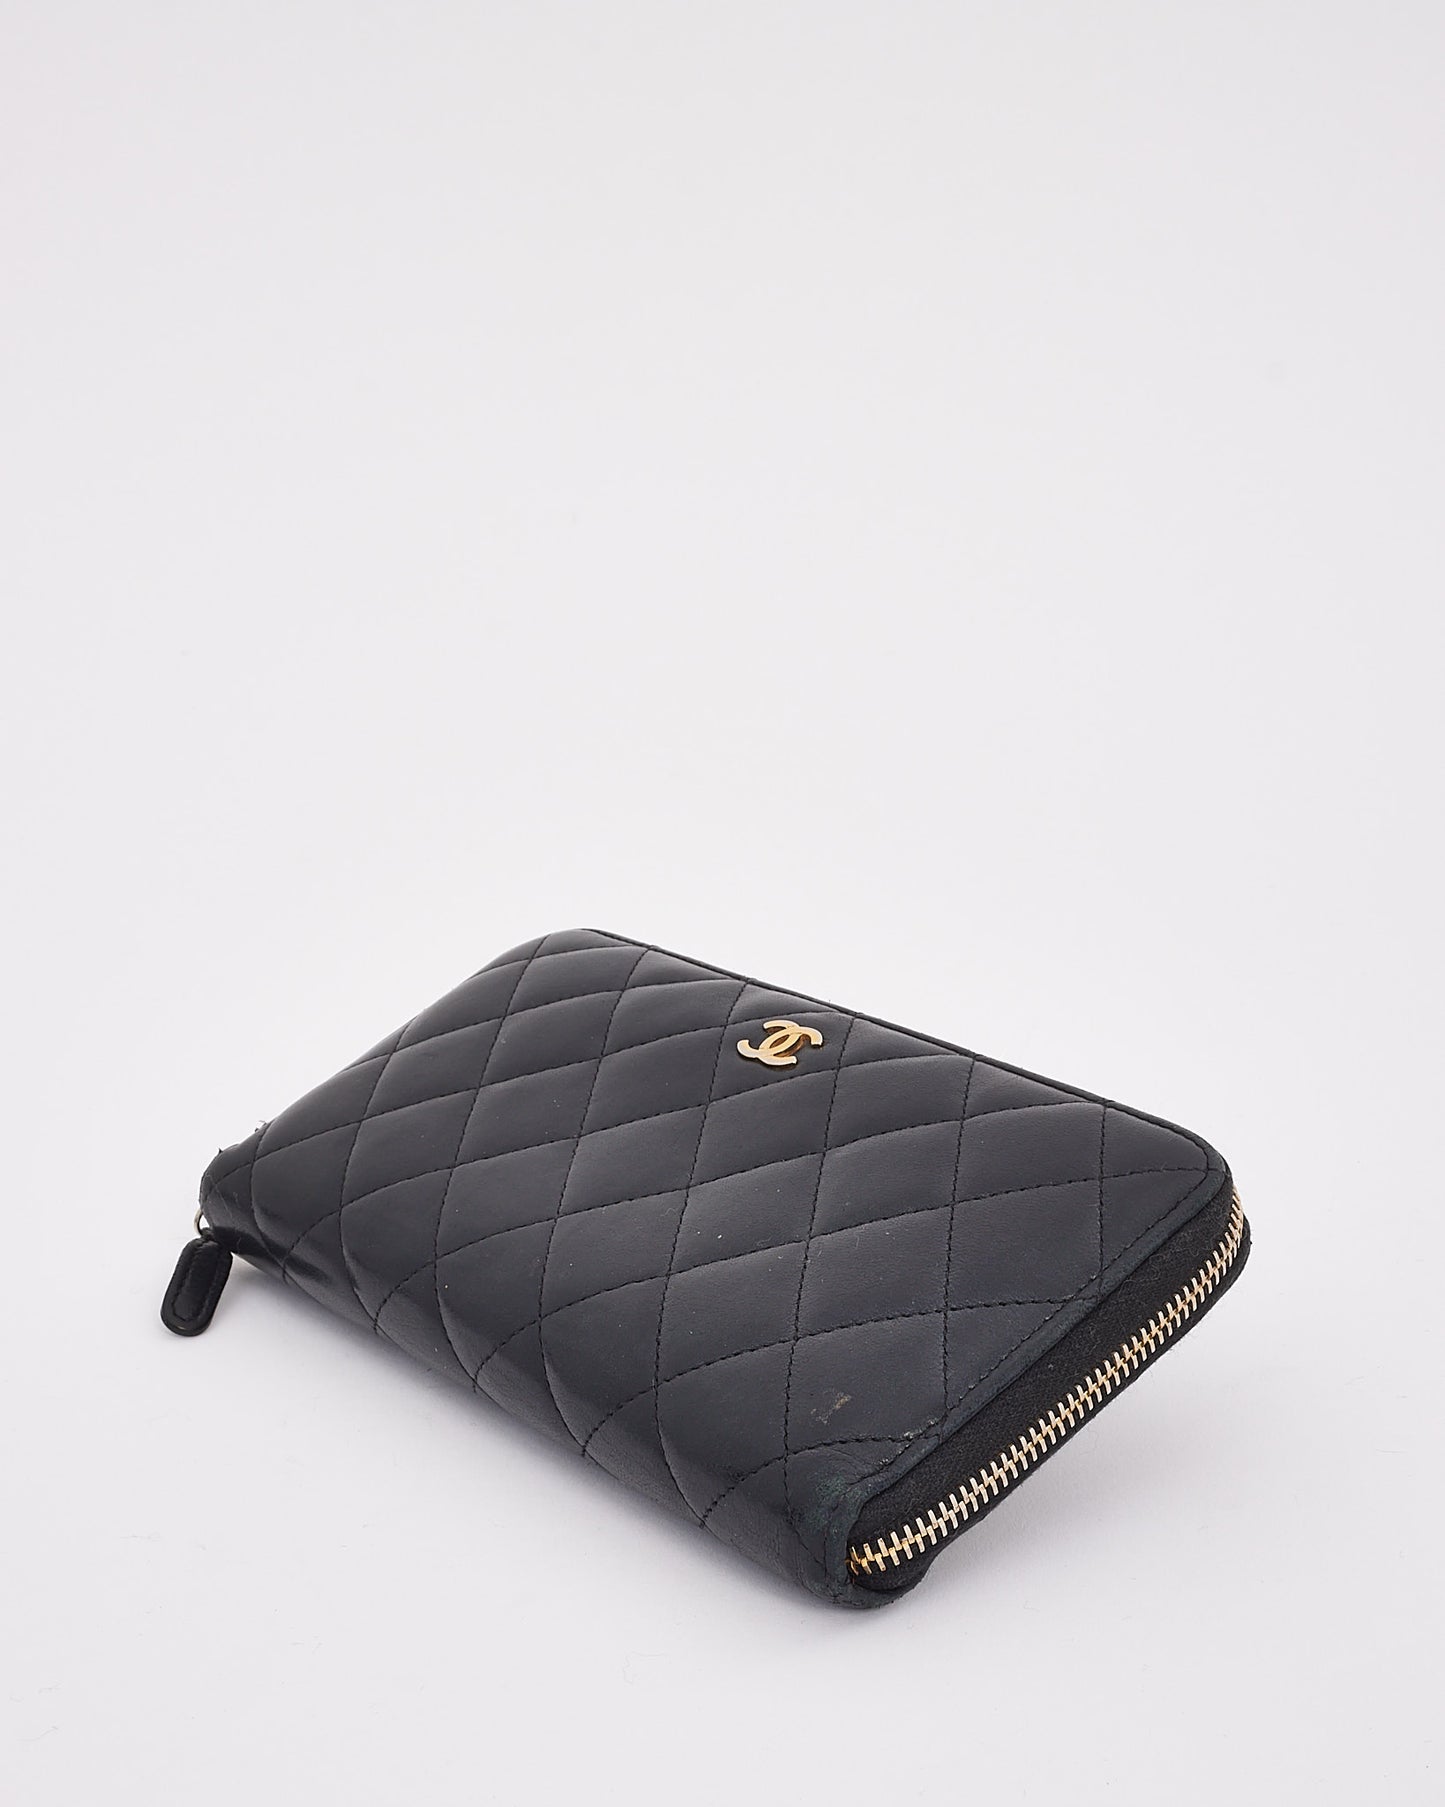 Chanel Black Quilted Leather Long Classic Wallet